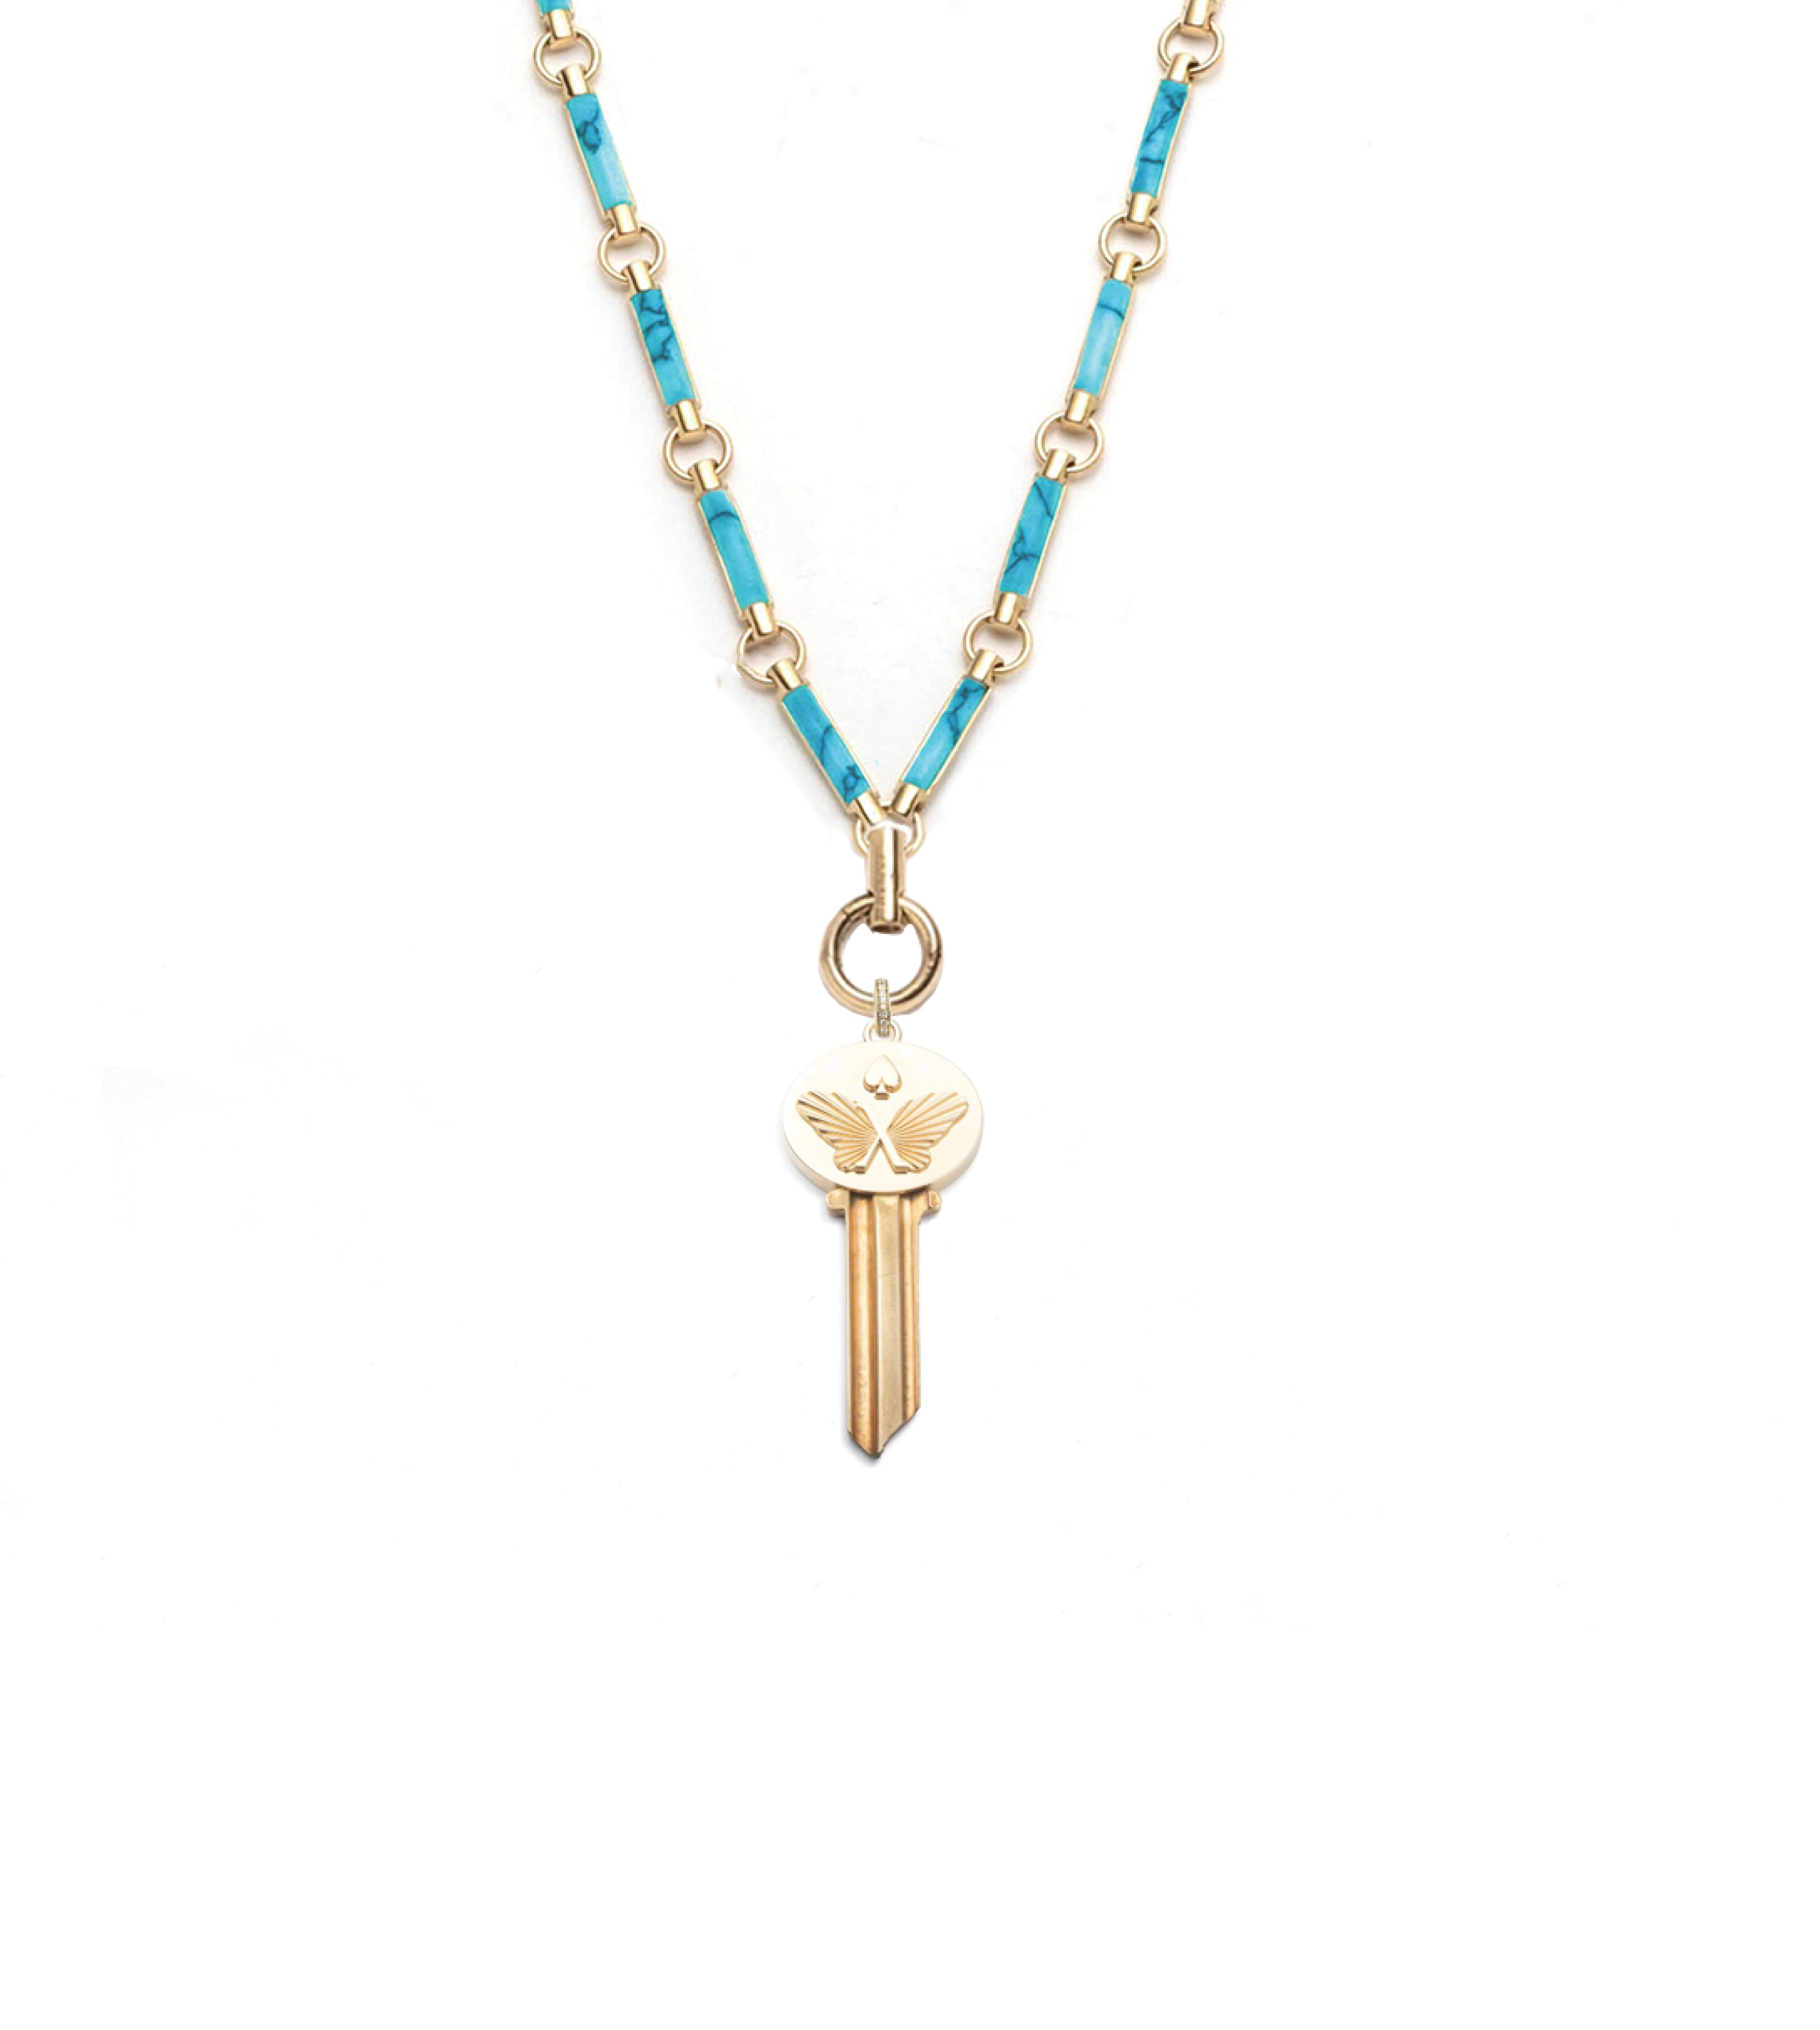 Reverie : Key Element Chain Turquoise Clockweight Necklace